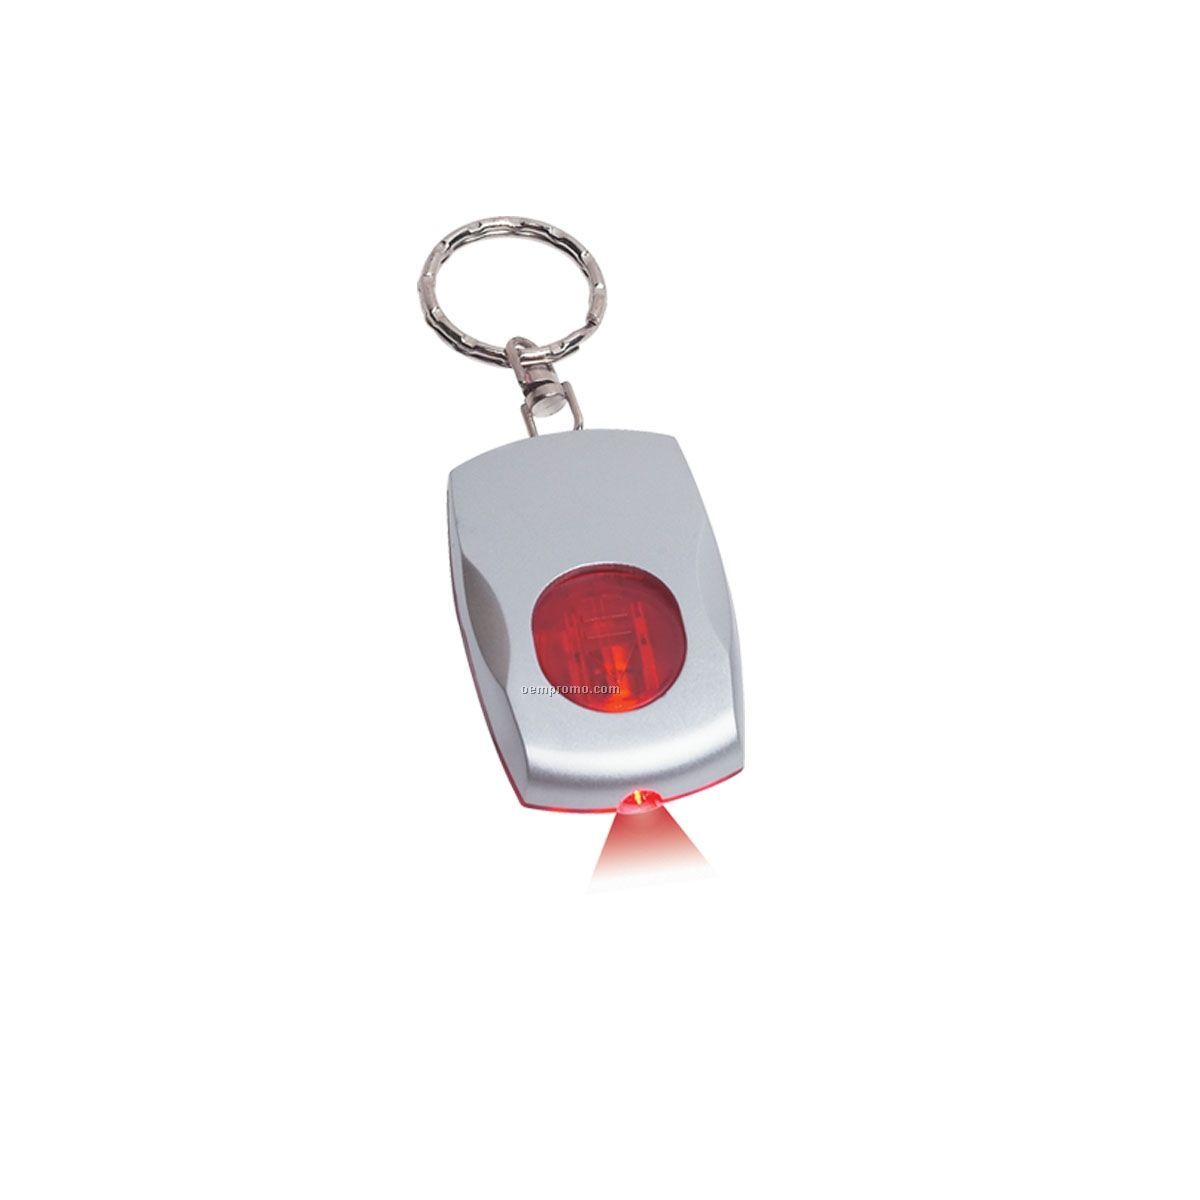 Light Up Keychain - Silver W/ Red Accents & White LED